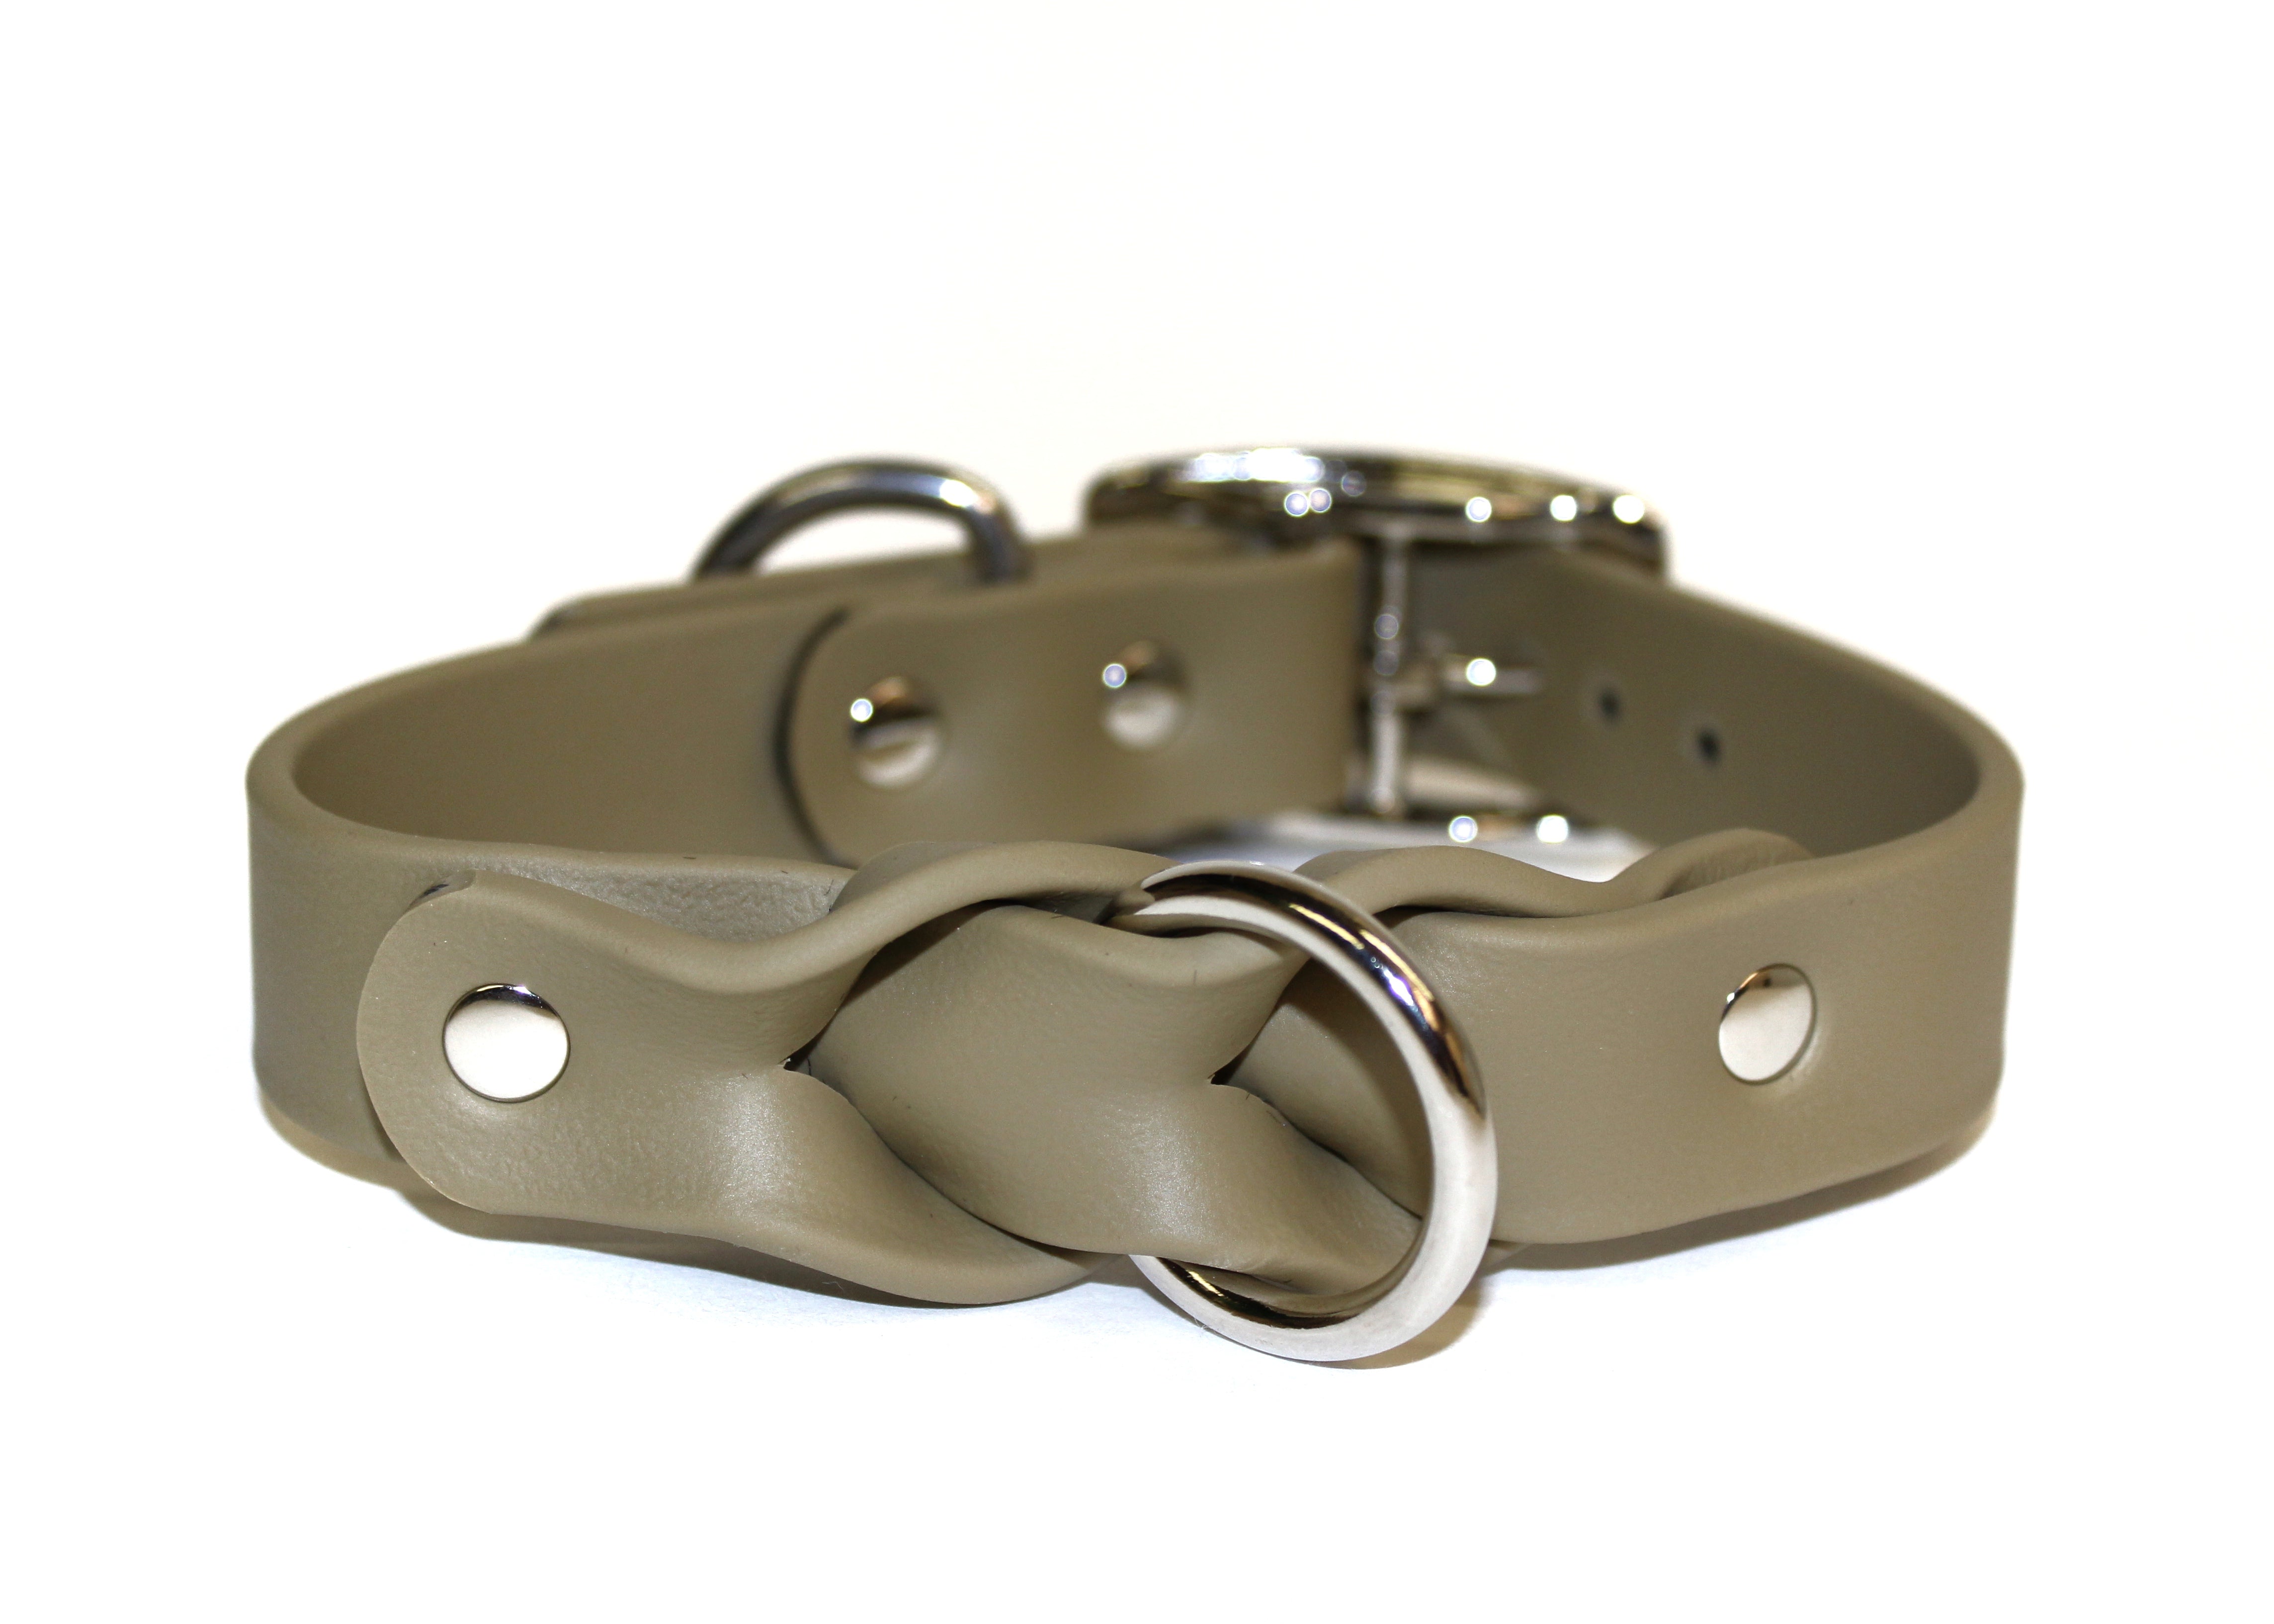 Olive Grove • Center Trenza Collar • Various Sizes • Nickel Plated • 1" Wide